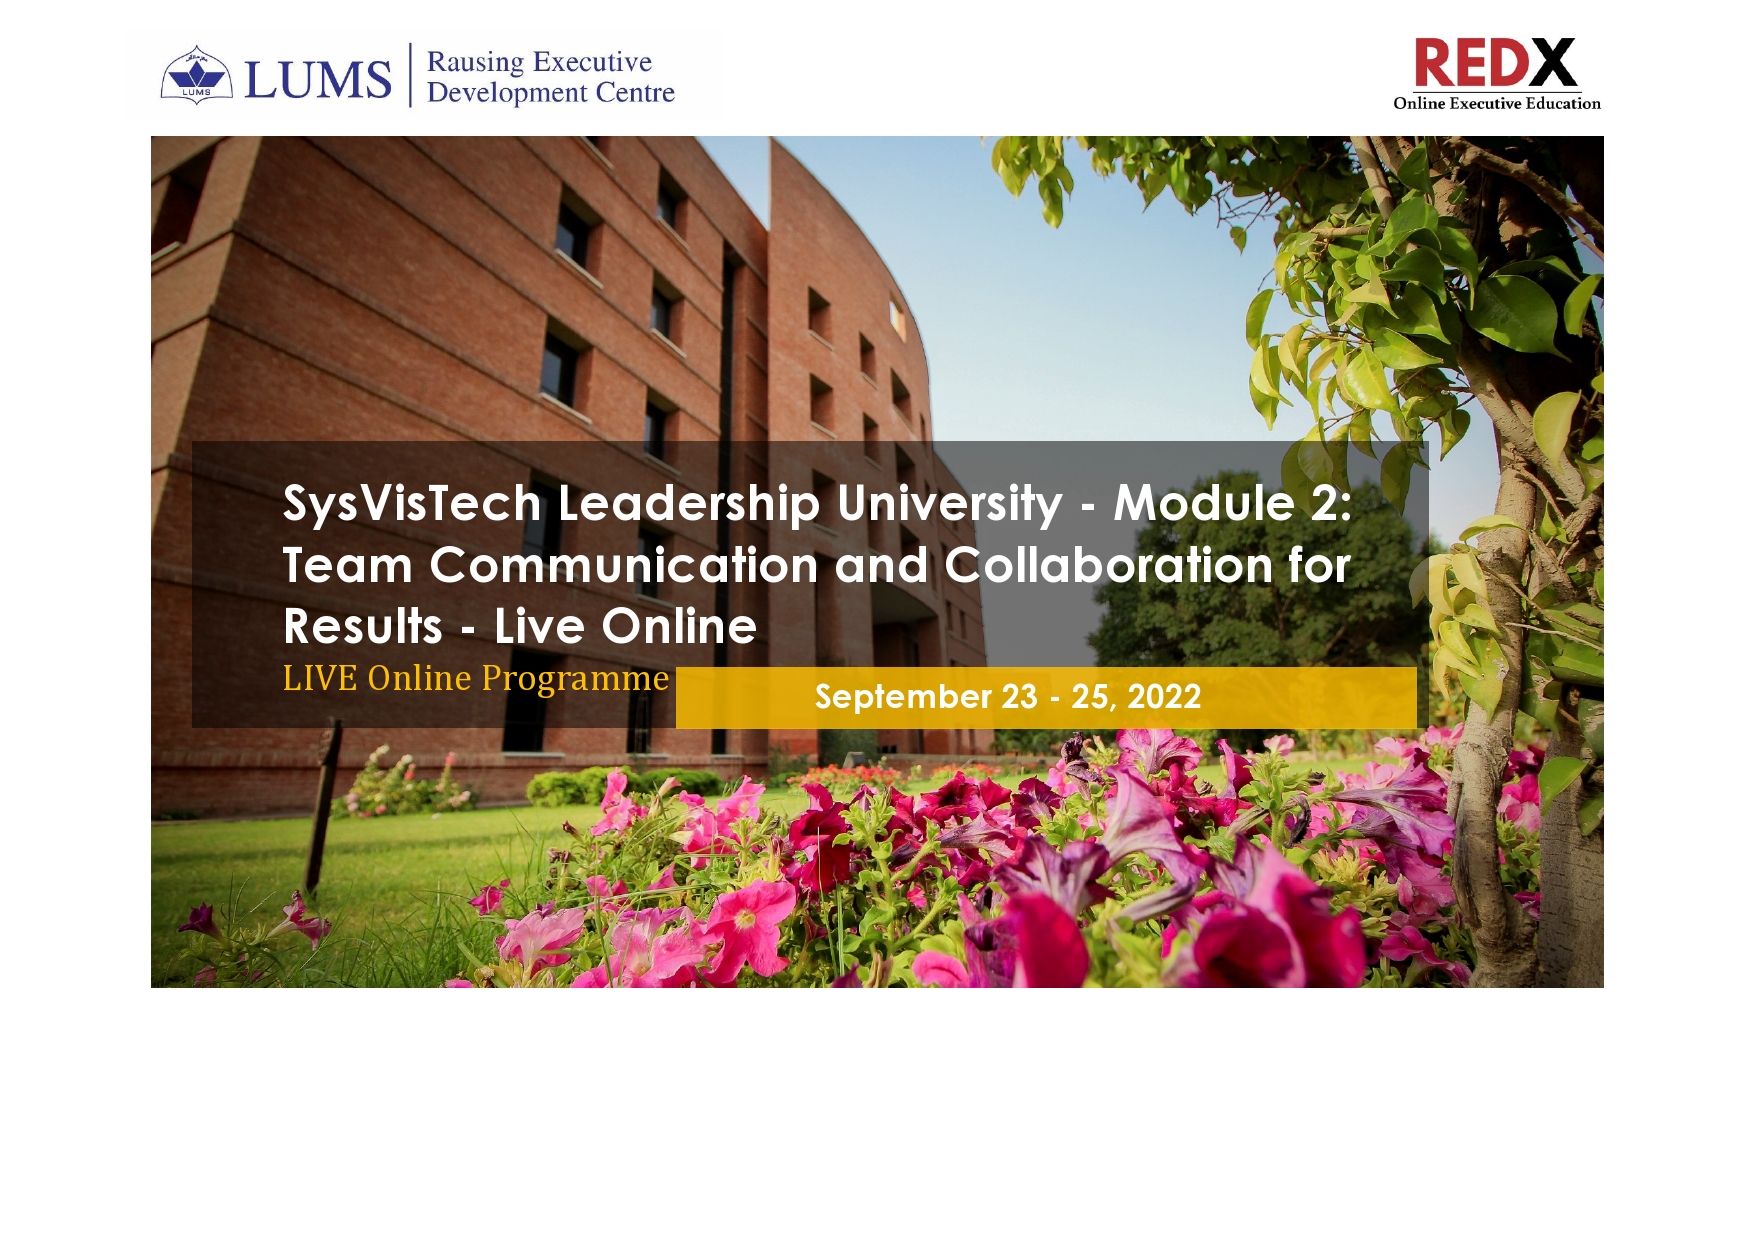 SysVisTech Leadership University - Module 2: Team Communication and Collaboration for Results